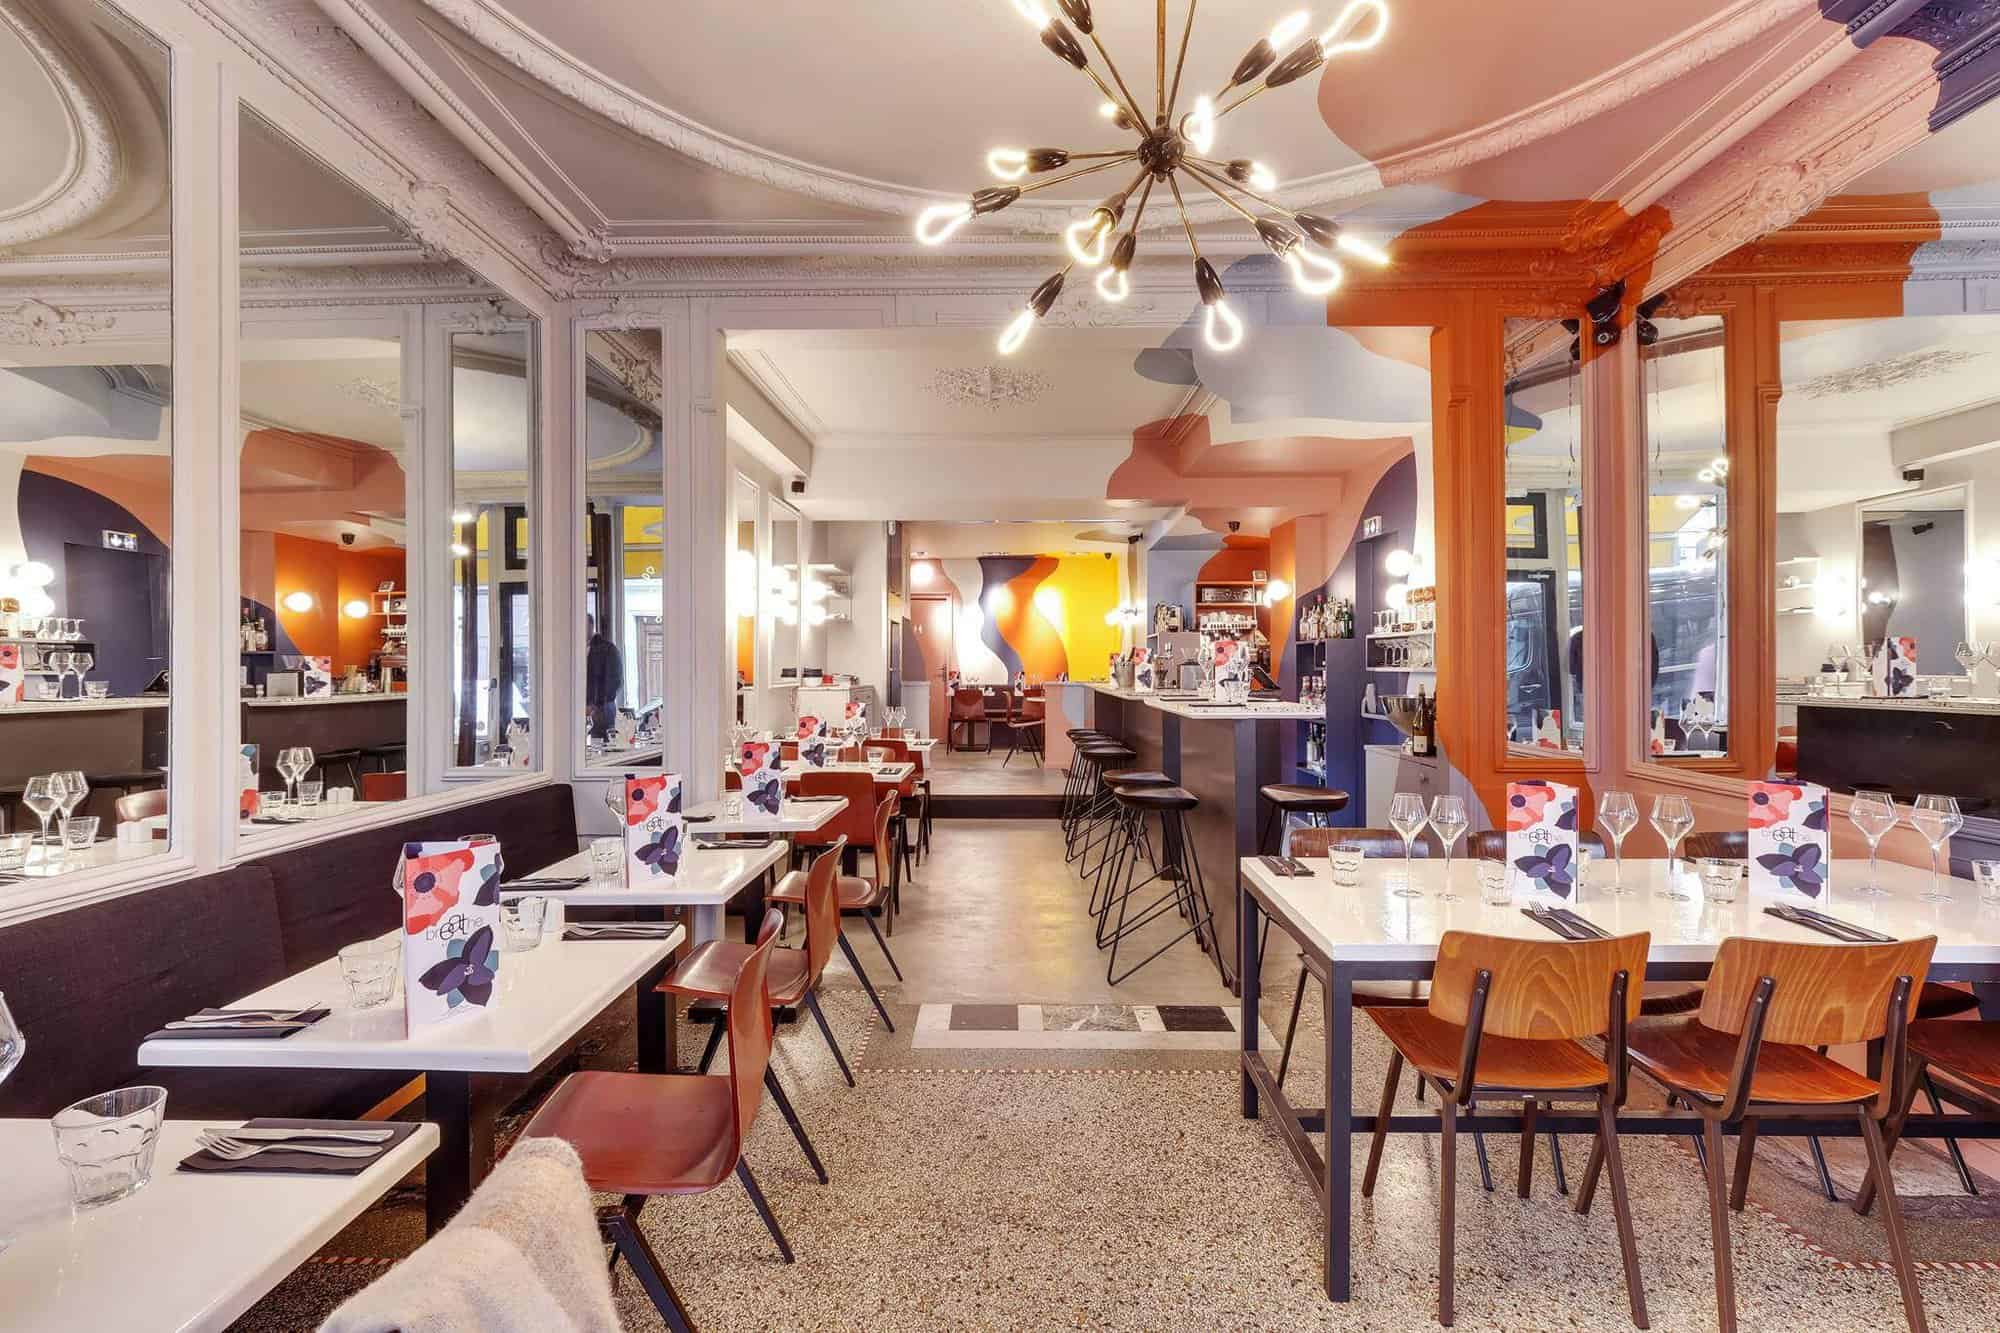 A photo of the interior of the restaurant brEATHE in Pigalle, Paris